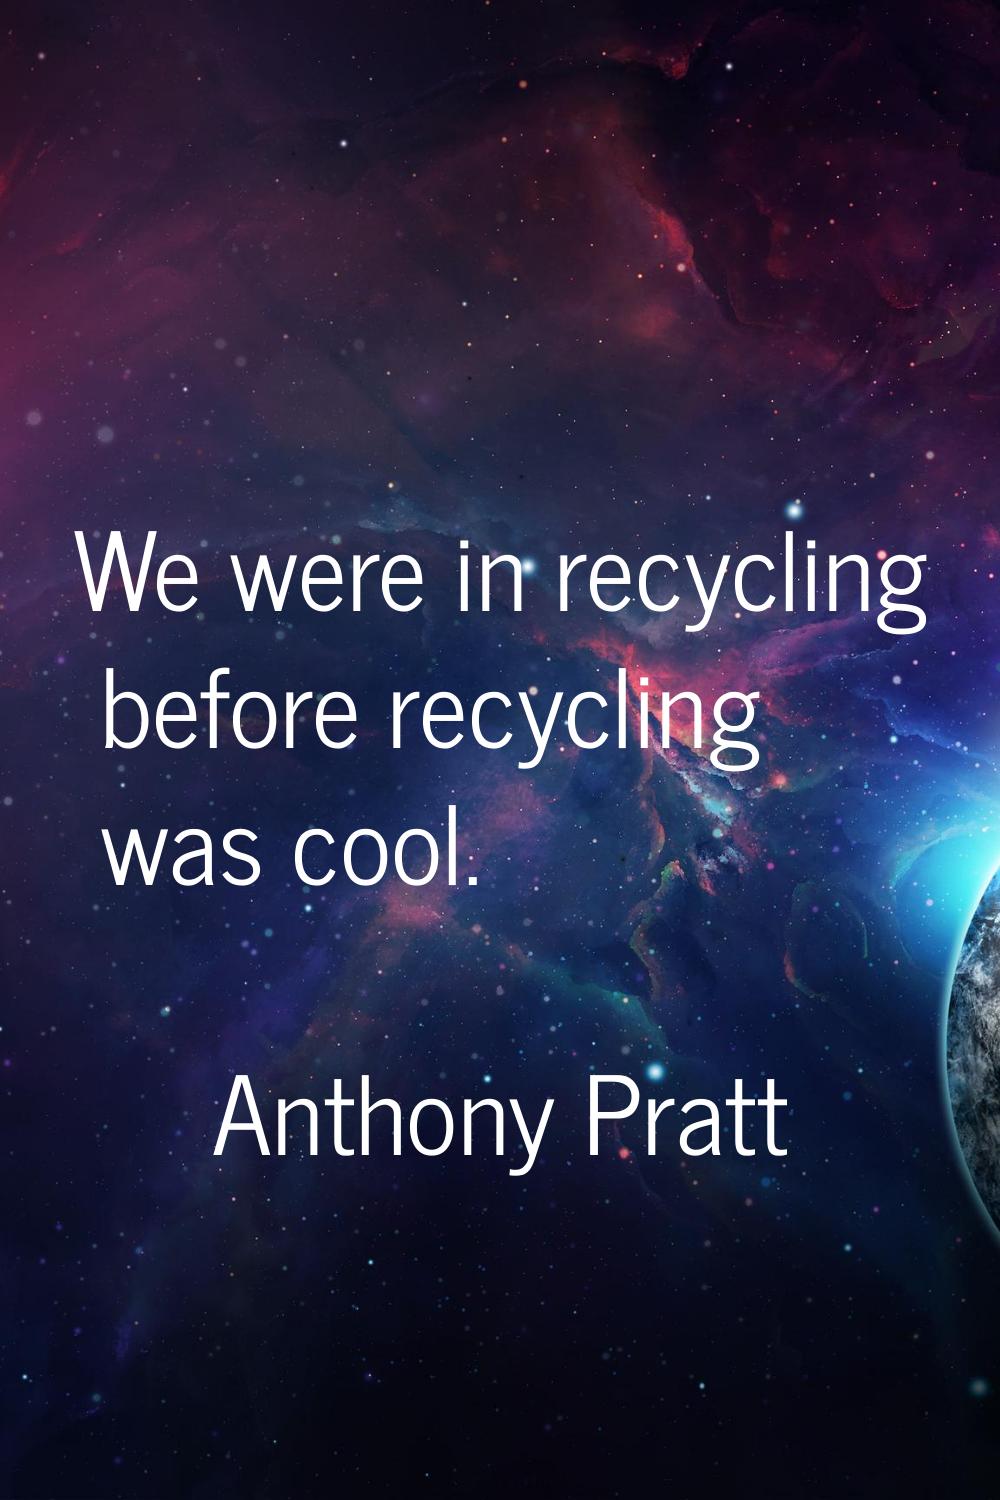 We were in recycling before recycling was cool.